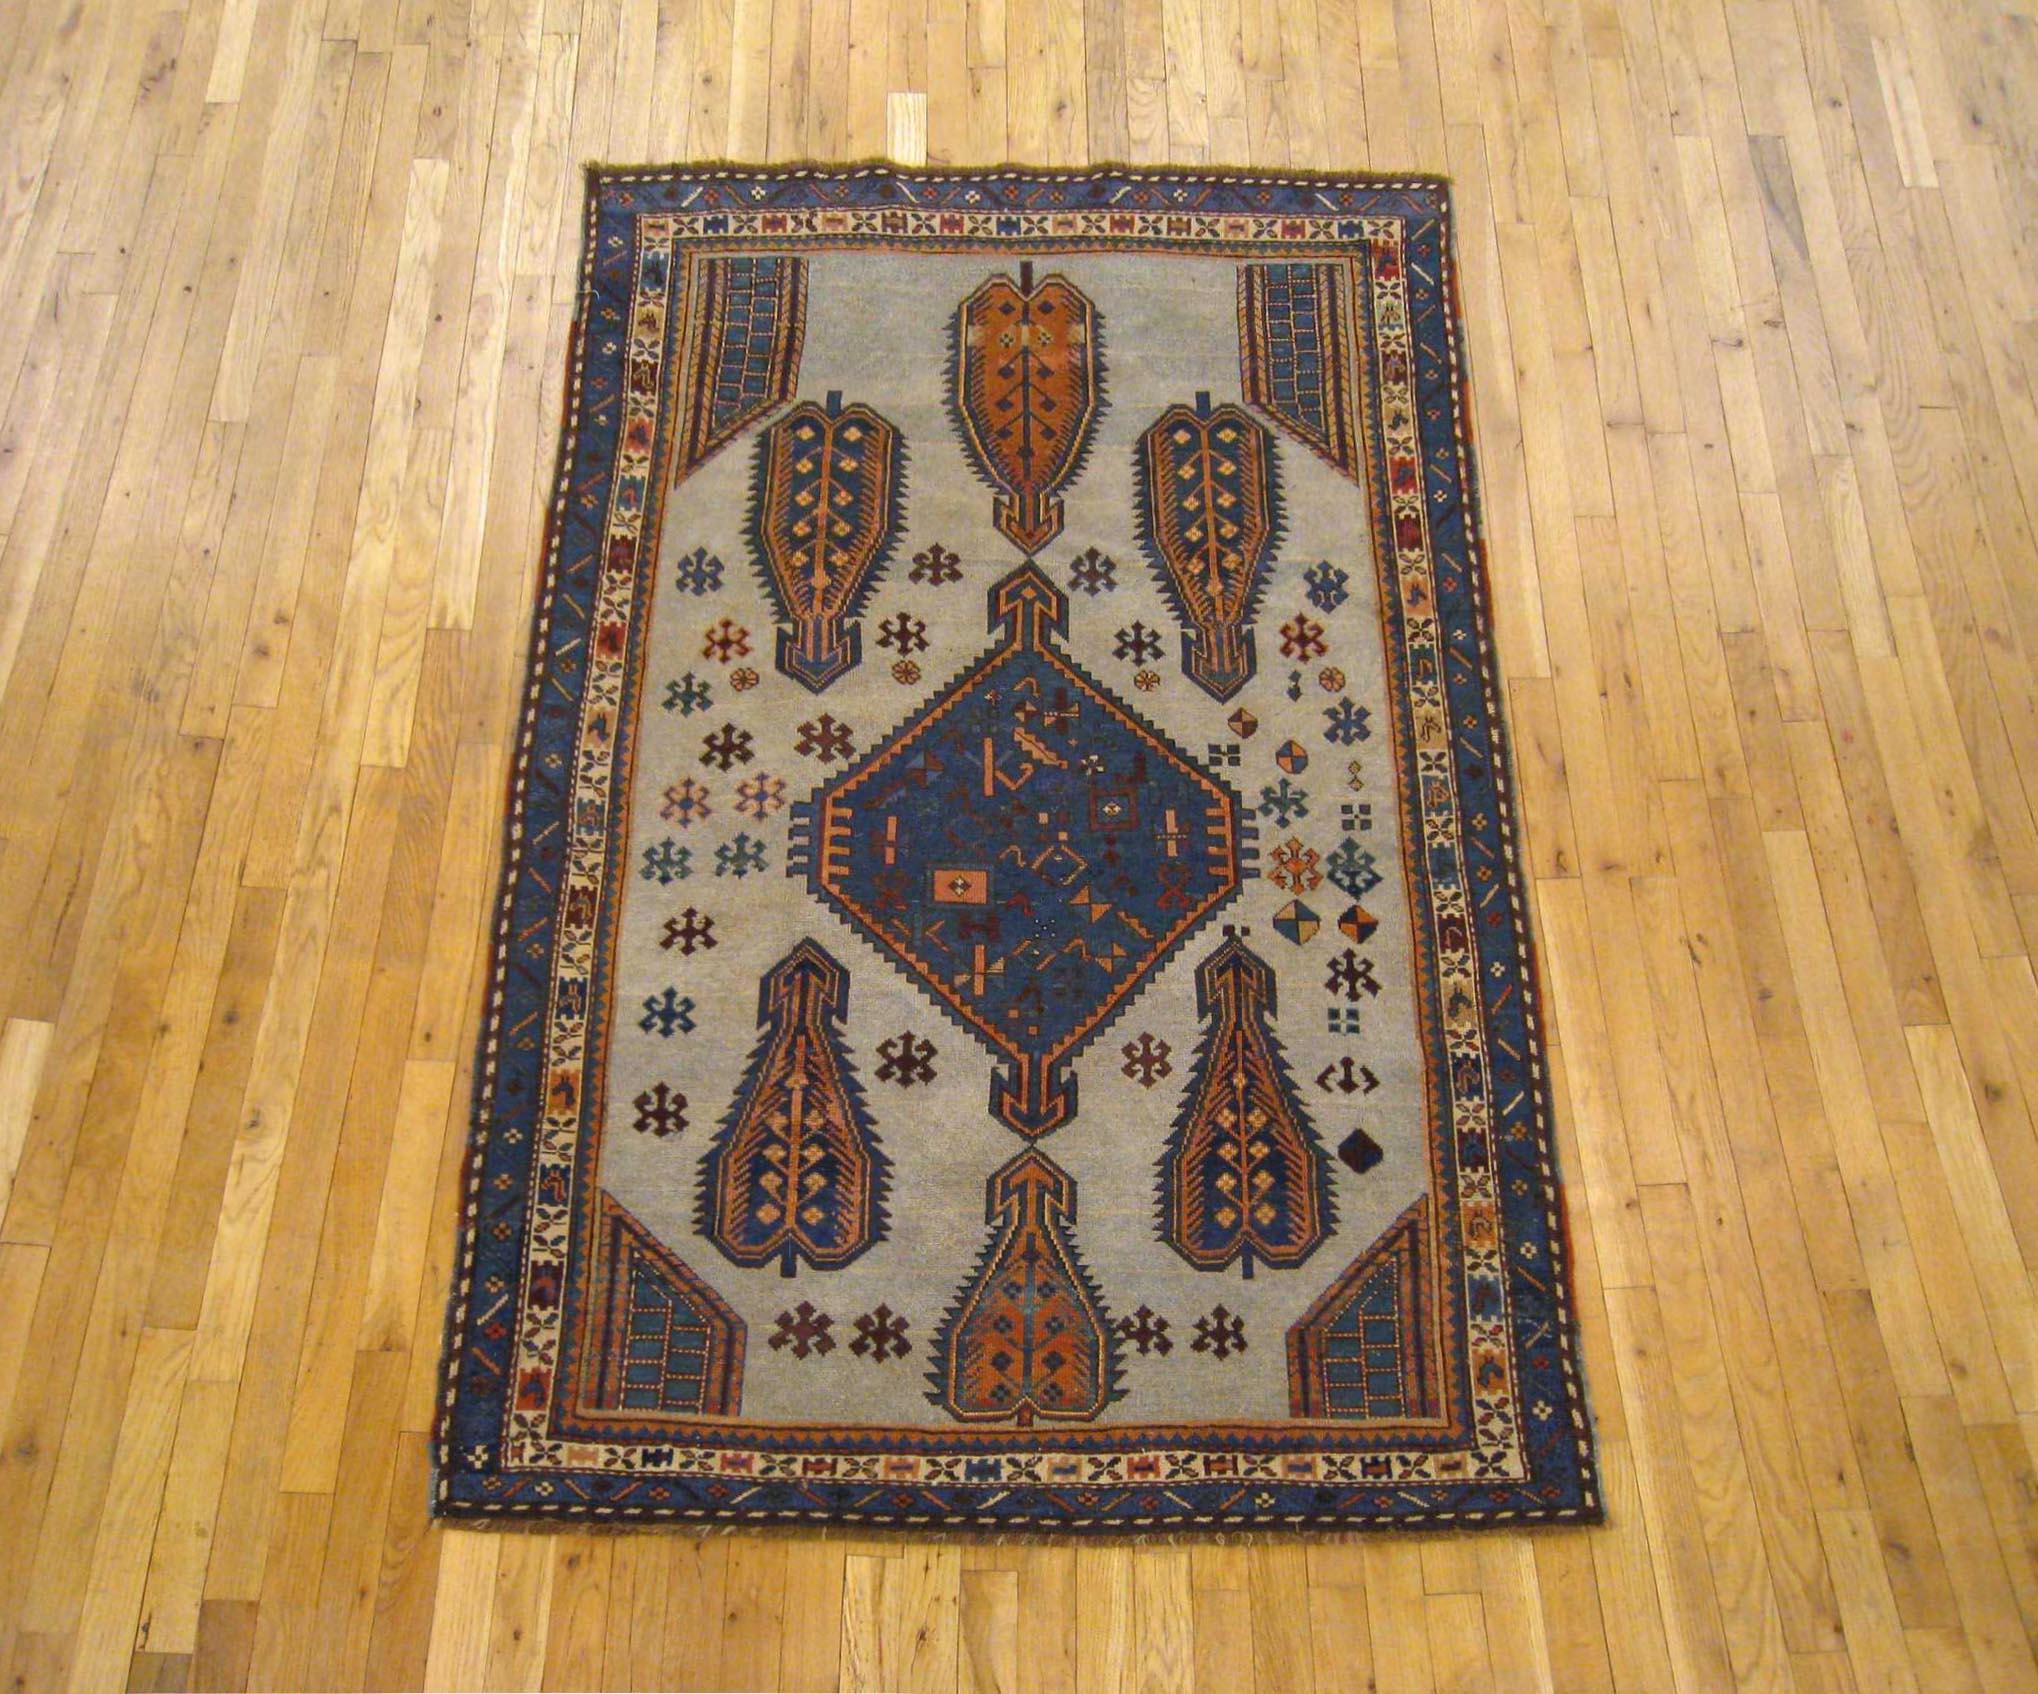 Antique Caucasian Kazak oriental carpet, small size, circa 1900

A one-of-a-kind antique Caucasian Kazak Oriental Carpet, hand-knotted with soft wool pile. This lovely hand-knotted wool rug features a central medallion with corner design on the